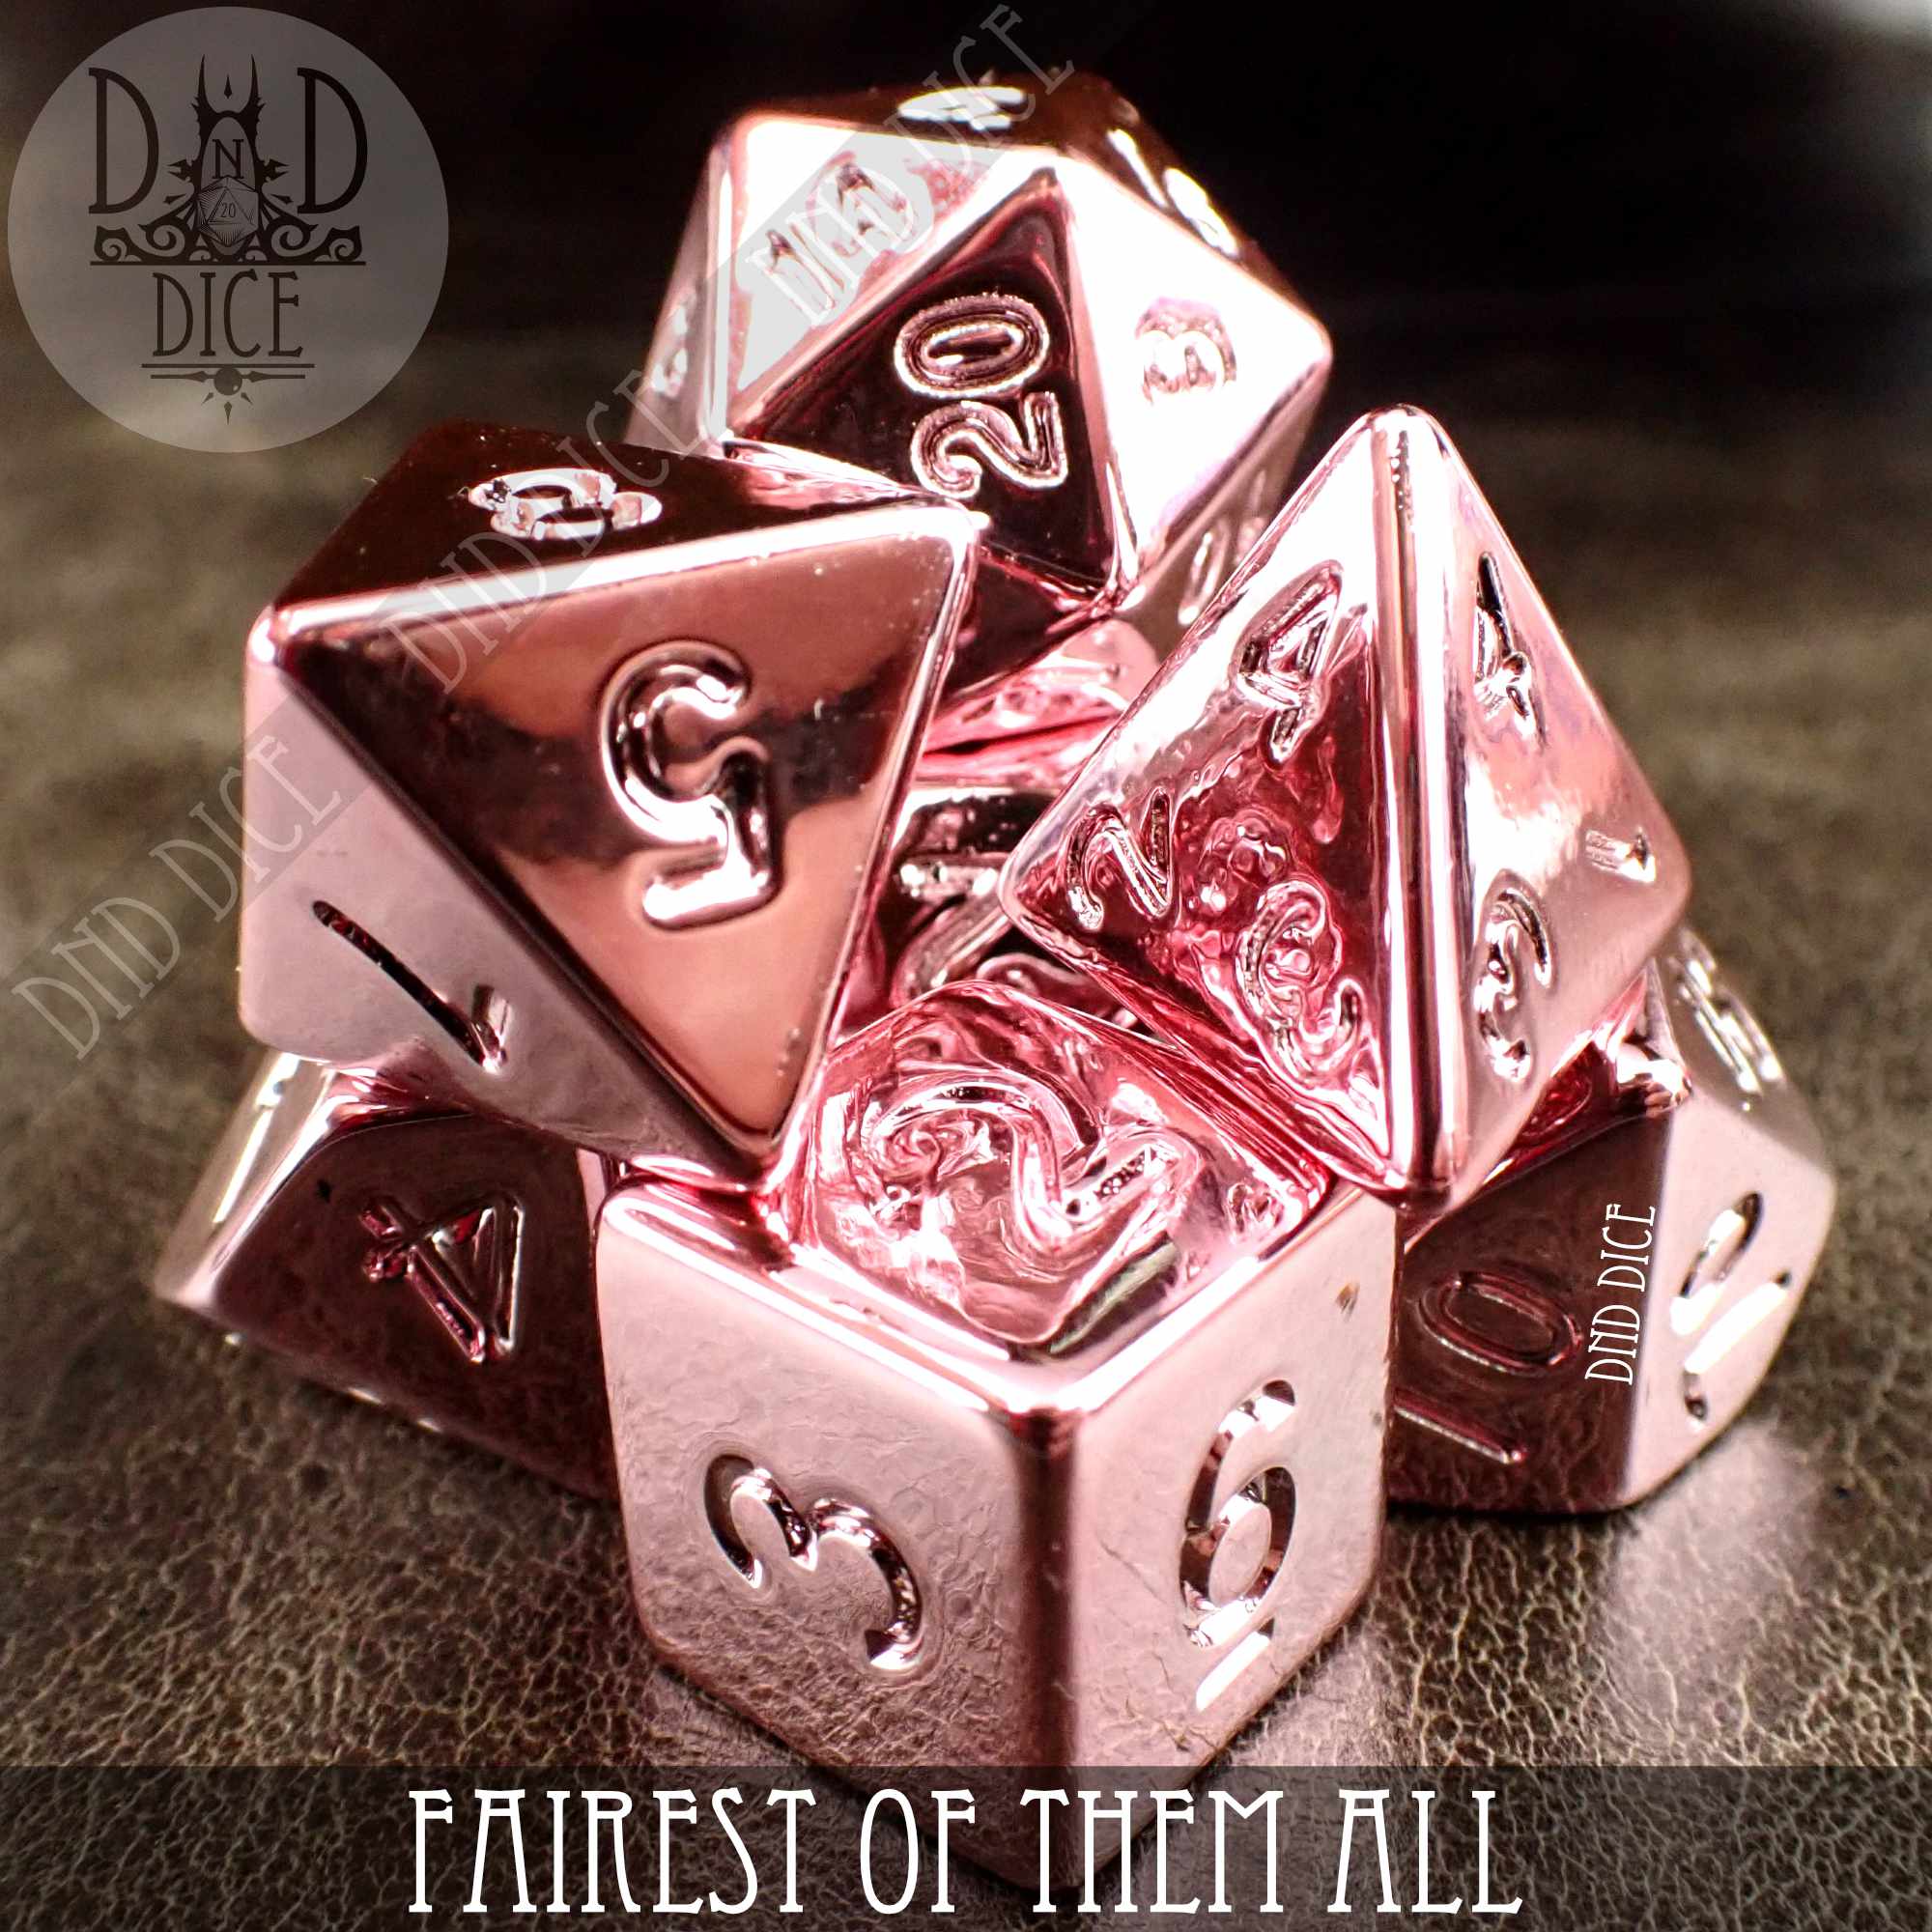 Fairest of Them All Dice Set